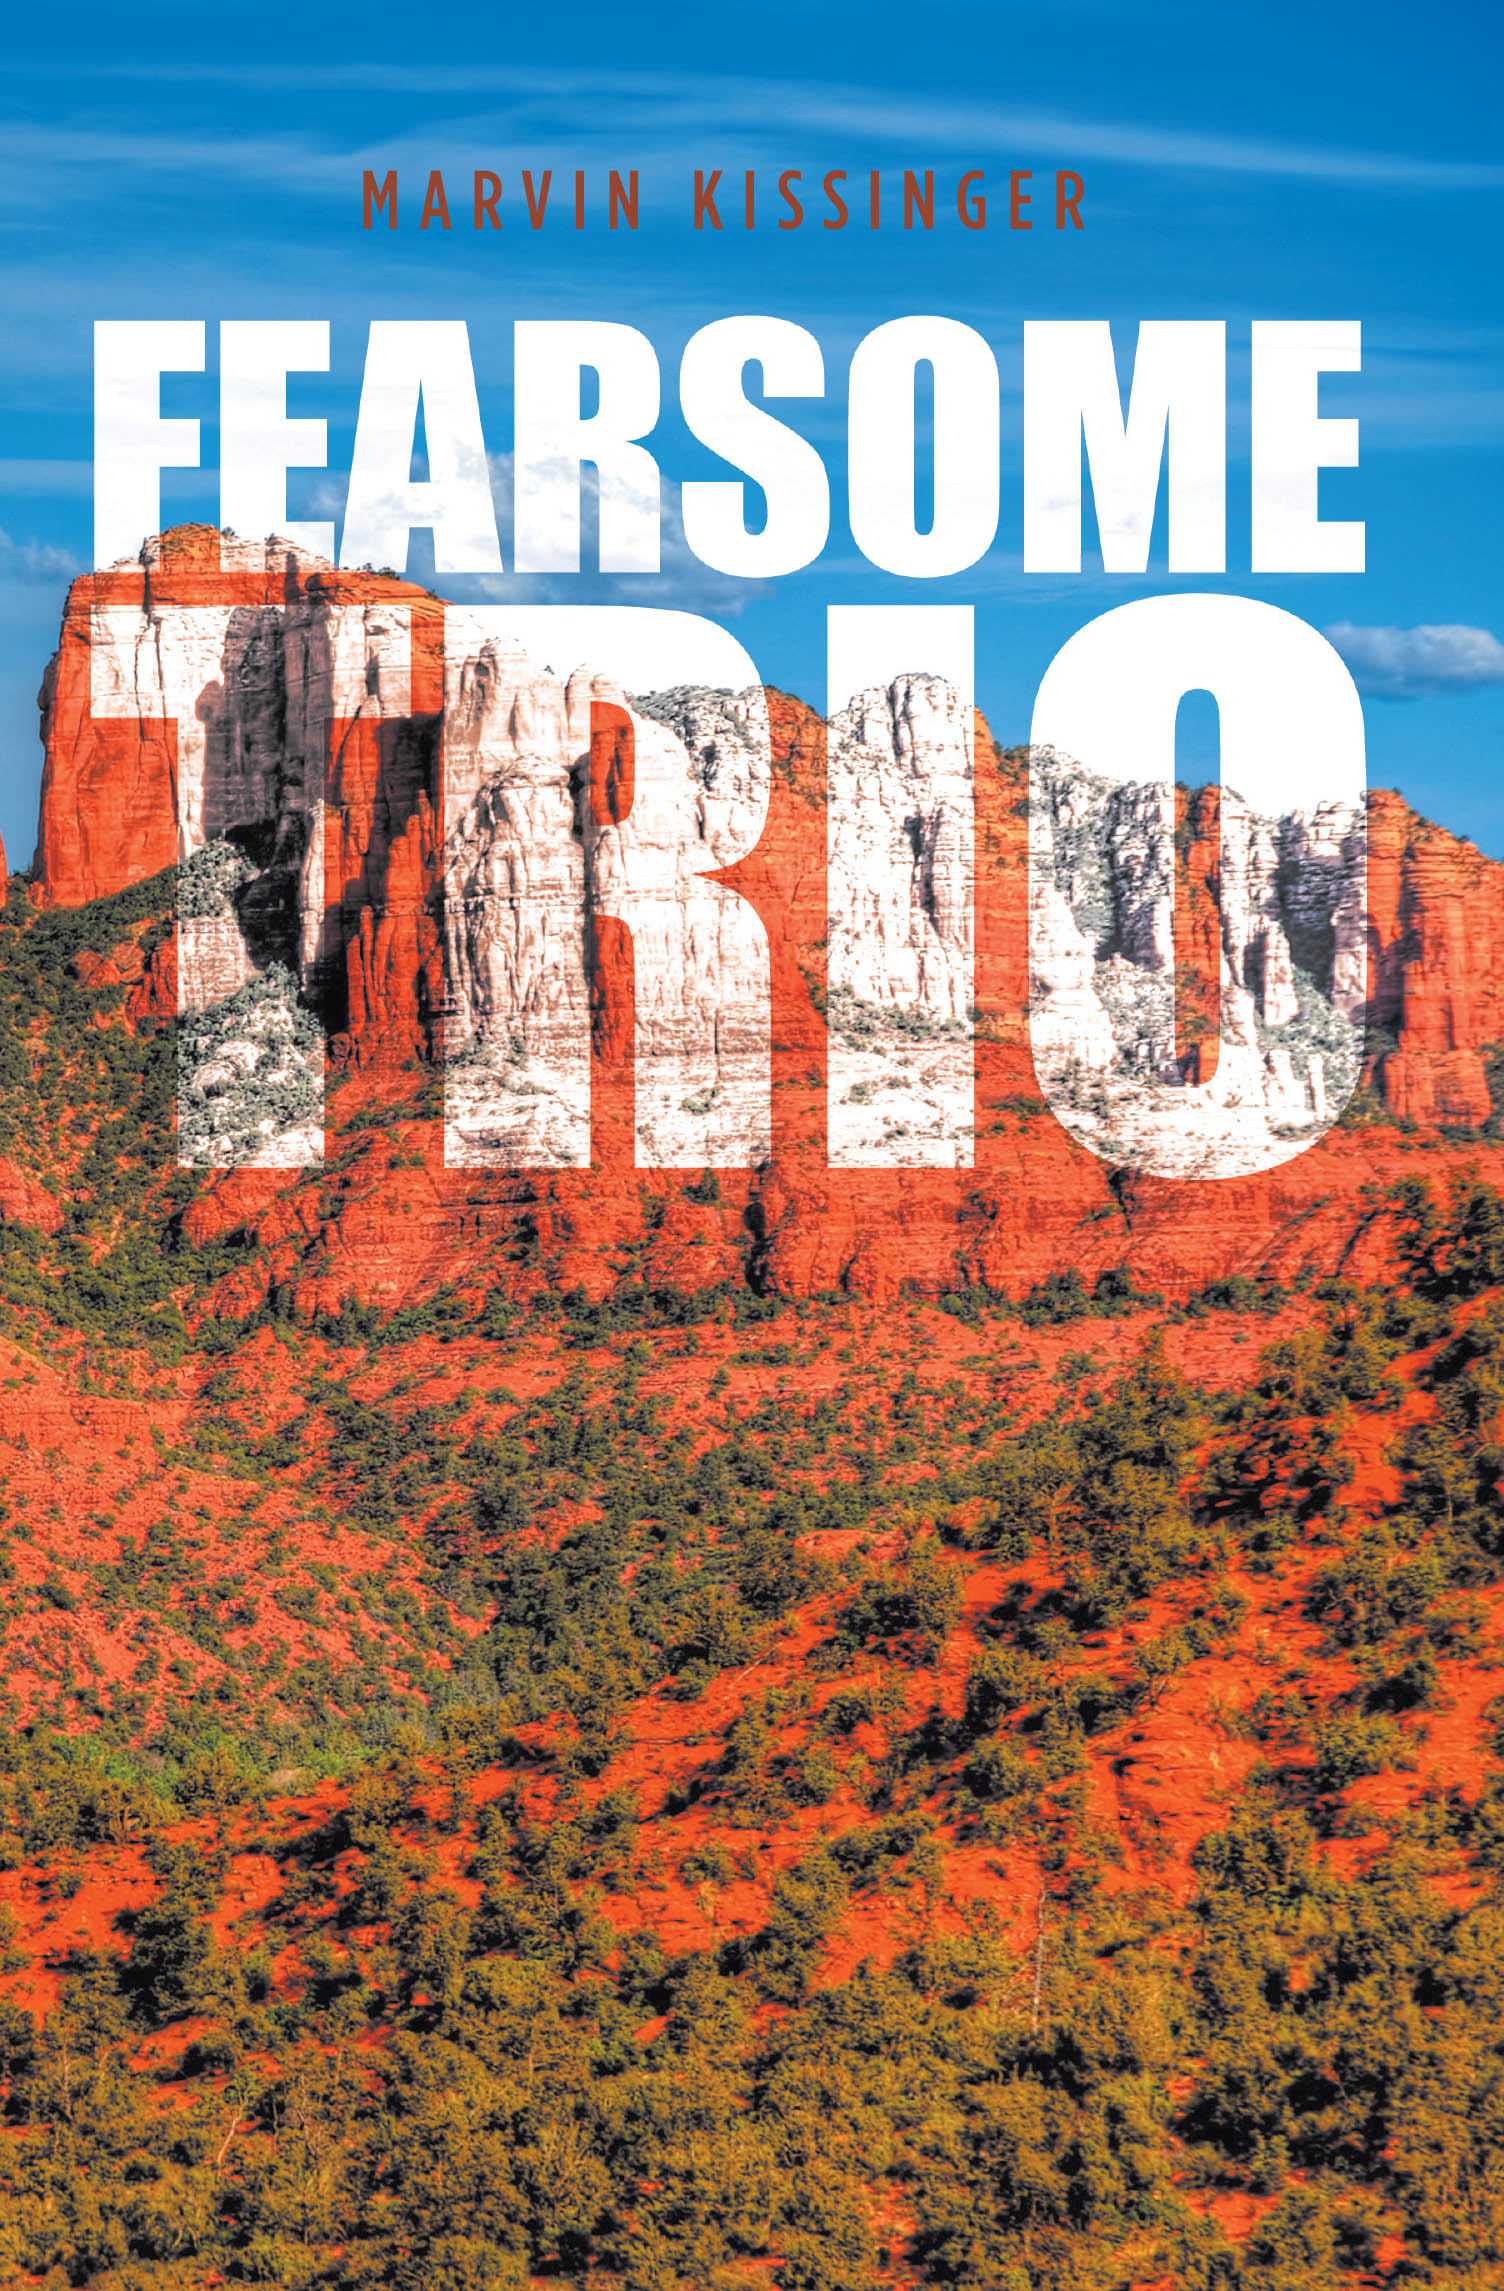 Author Marvin Kissinger’s New Book, "Fearsome Trio," is a Heartwarming and Captivating Tale of Friendship and Adventure Set Against Arizona’s Scenic Landscape